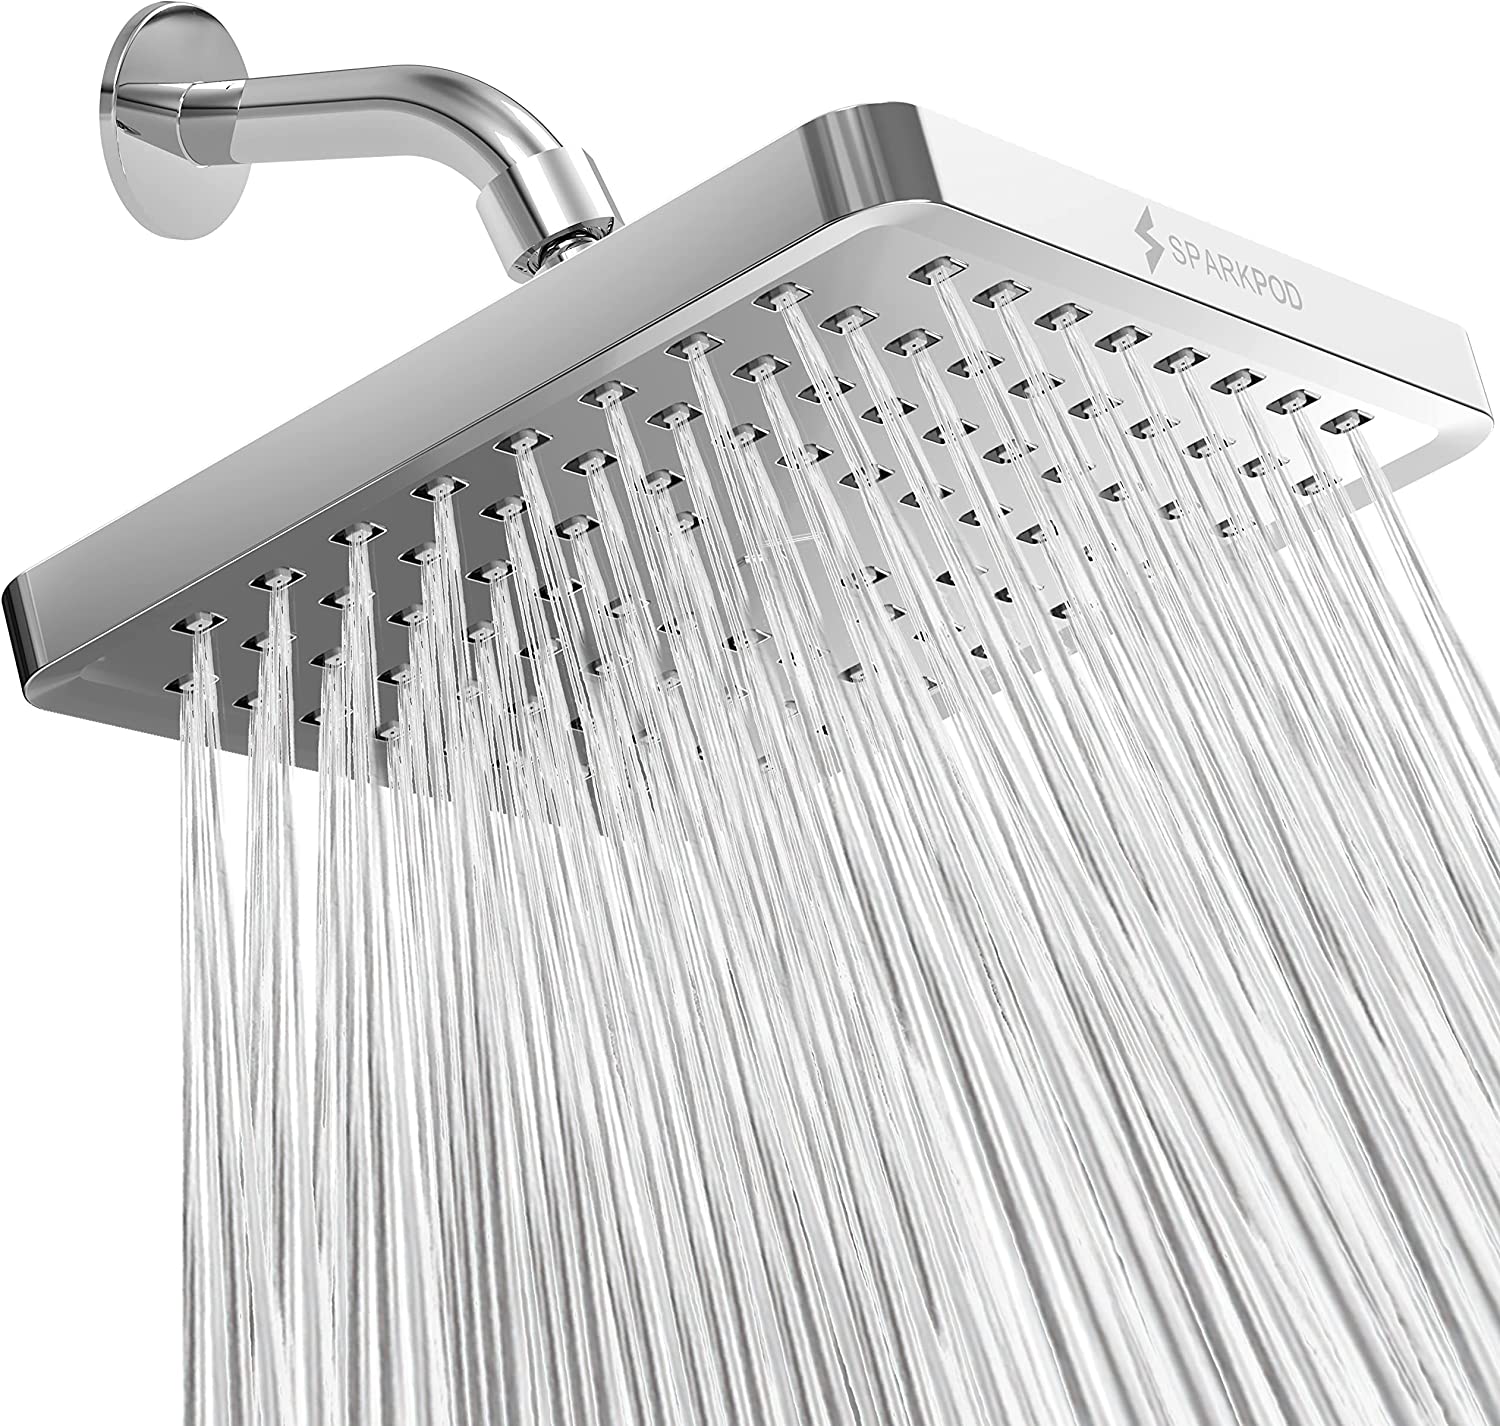 Sparkpod Fixed Shower Head - High Pressure Rain - Luxury Modern Chrome Look - Easy Tool Free Installation - Adjustable Replacement for Your Bathroom Shower Heads (Polished Chrome, 8 Inch Square)